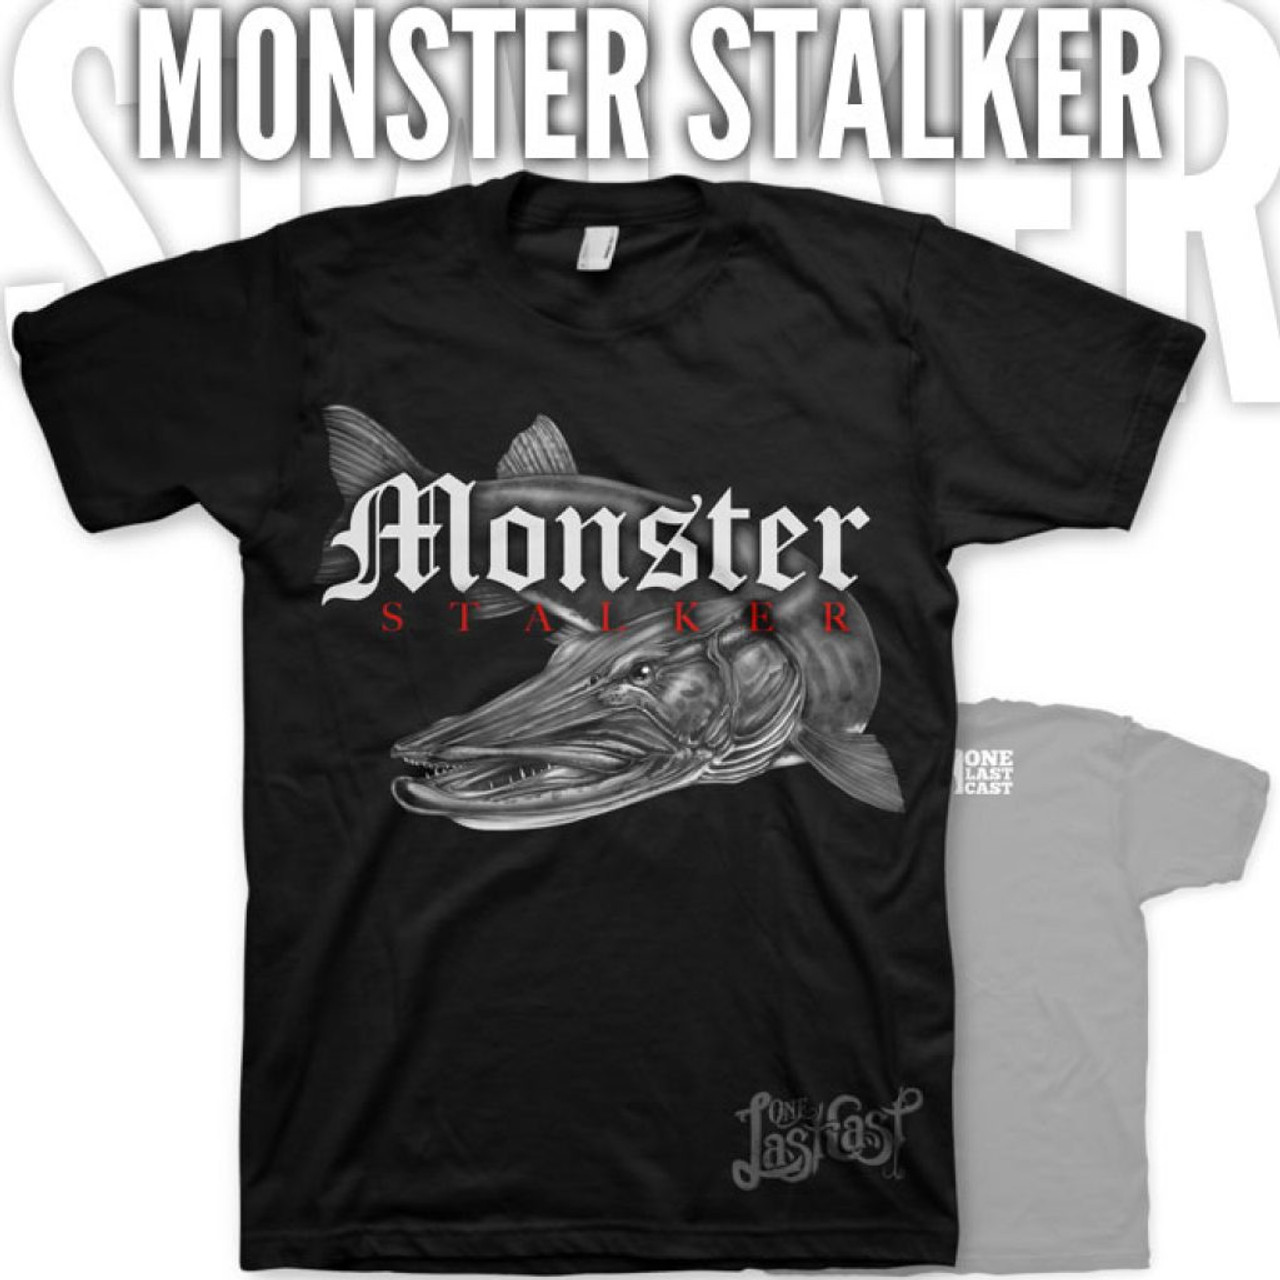 https://cdn11.bigcommerce.com/s-eemvl8dub3/images/stencil/1280x1280/products/175/726/one-last-cast-fishing-clothing-monster-stalker-banner-1024x1024__67284.1559202601.jpg?c=2